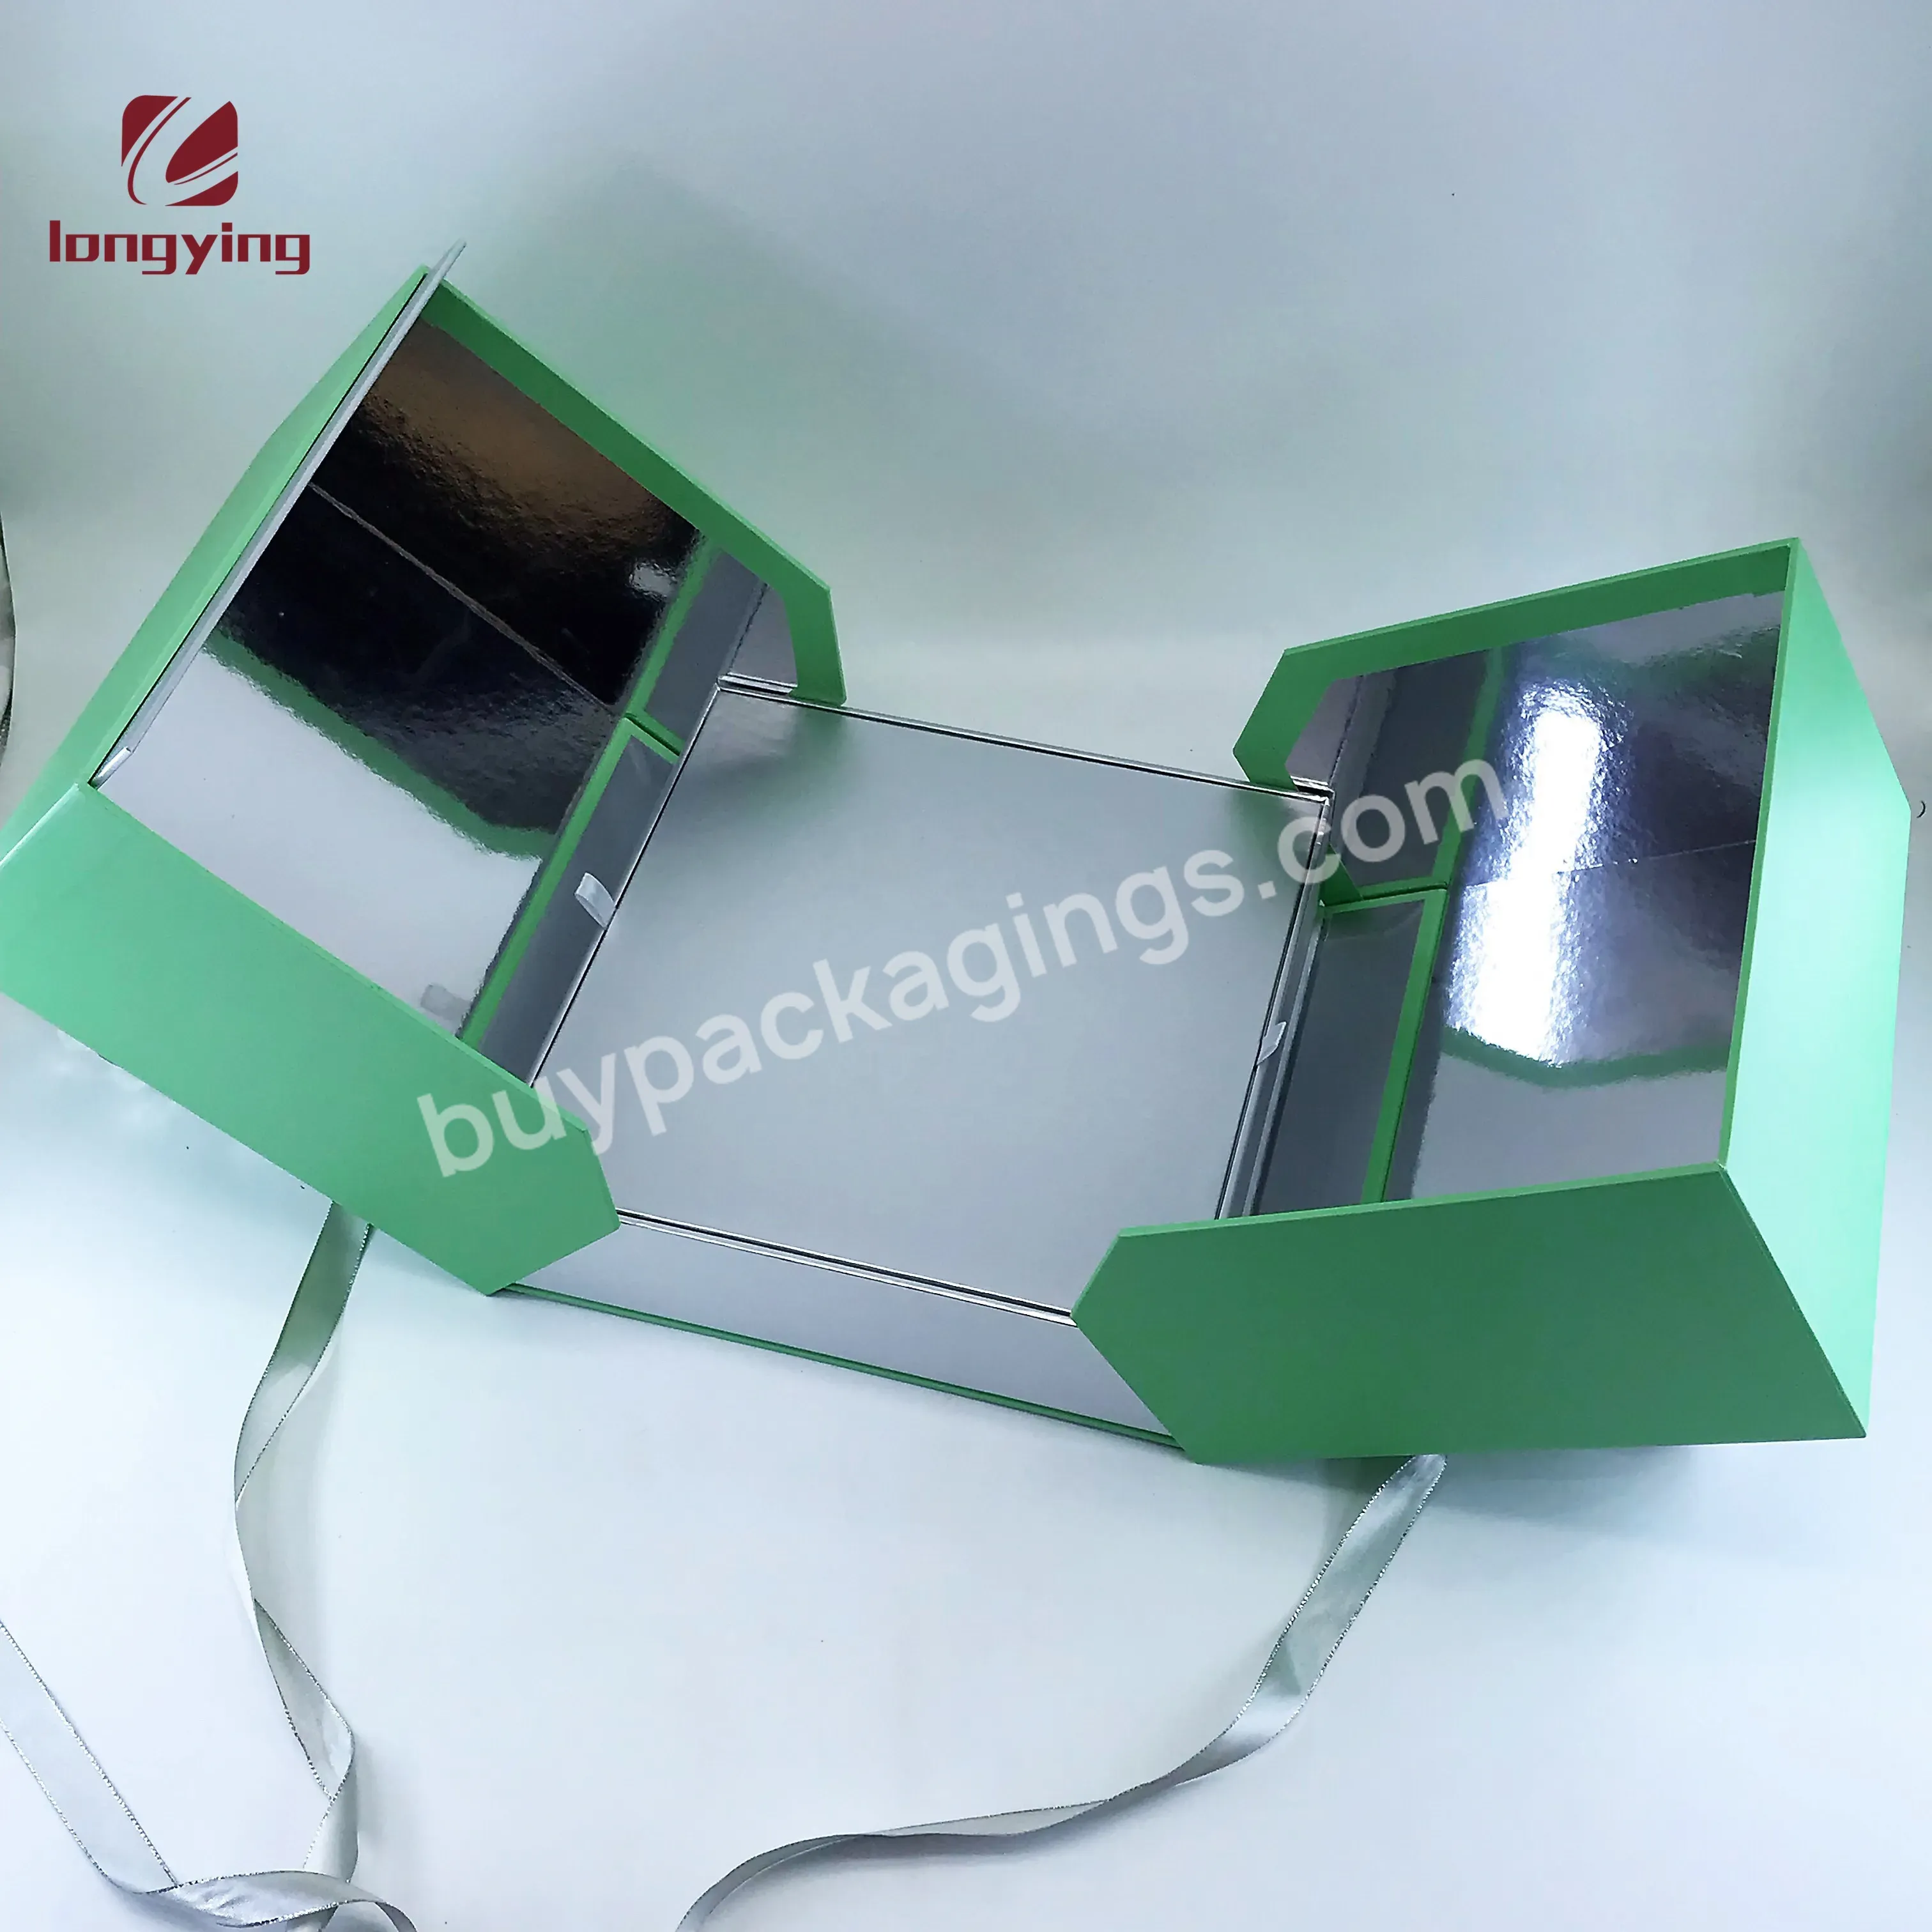 China Custom Logo Big Luxury Fashion Cardboard Boxes With Ribbon Handle Square Double Door For Sets Rose Flower Box Packaging - Buy Sets Rose Flower Box Packaging,Ribbon Handle Square Double Door,China Custom Logo Big Luxury Fashion Cardboard Boxes.